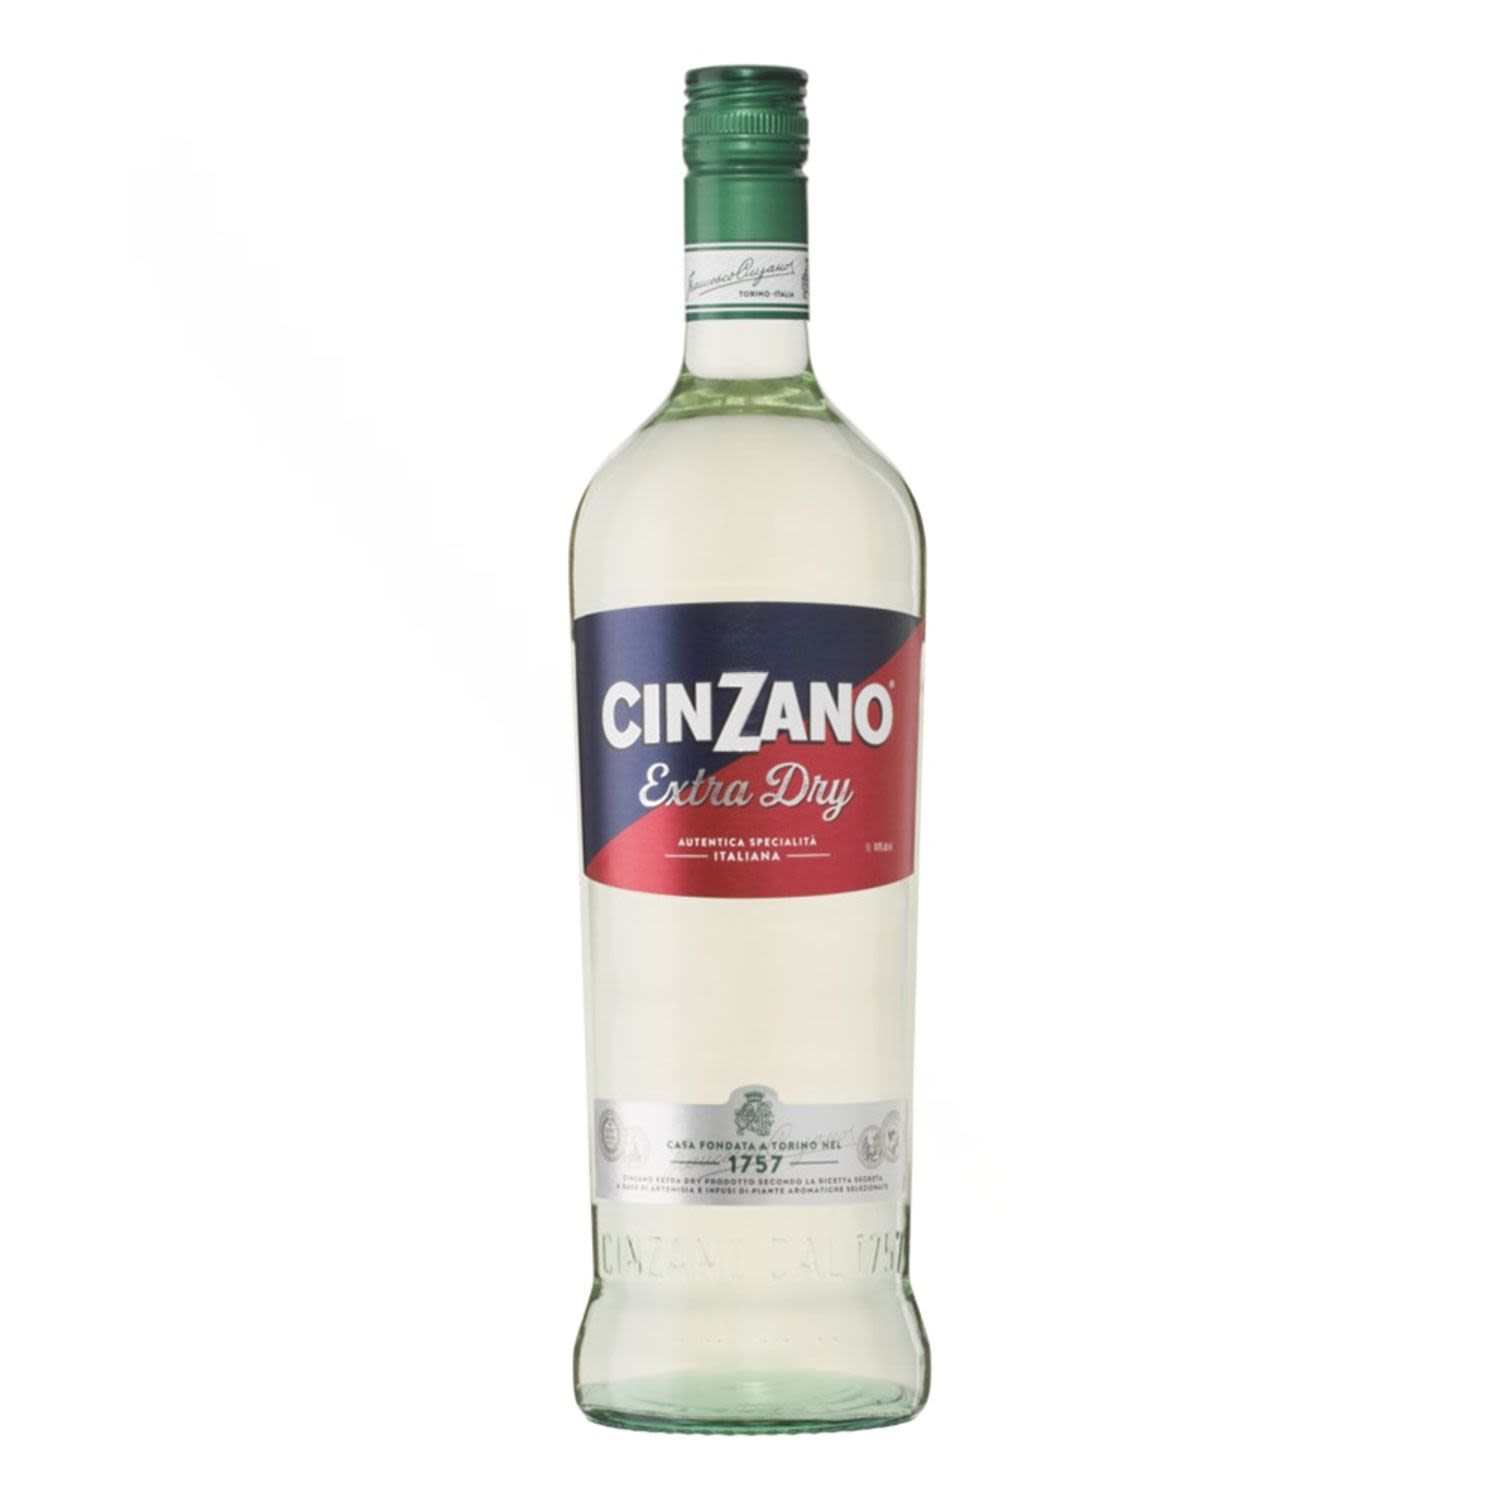 A delicately flavoured, extra dry Vermouth that can be enjoyed straight or with ice, and is also the perfect base for many dry cocktails.<br /> <br />Alcohol Volume: 14.40%<br /><br />Pack Format: Bottle<br /><br />Standard Drinks: 11.4</br /><br />Pack Type: Bottle<br /><br />Country of Origin: Italy<br /><br />Region: Piedmont<br /><br />Vintage: Non Vintage<br />